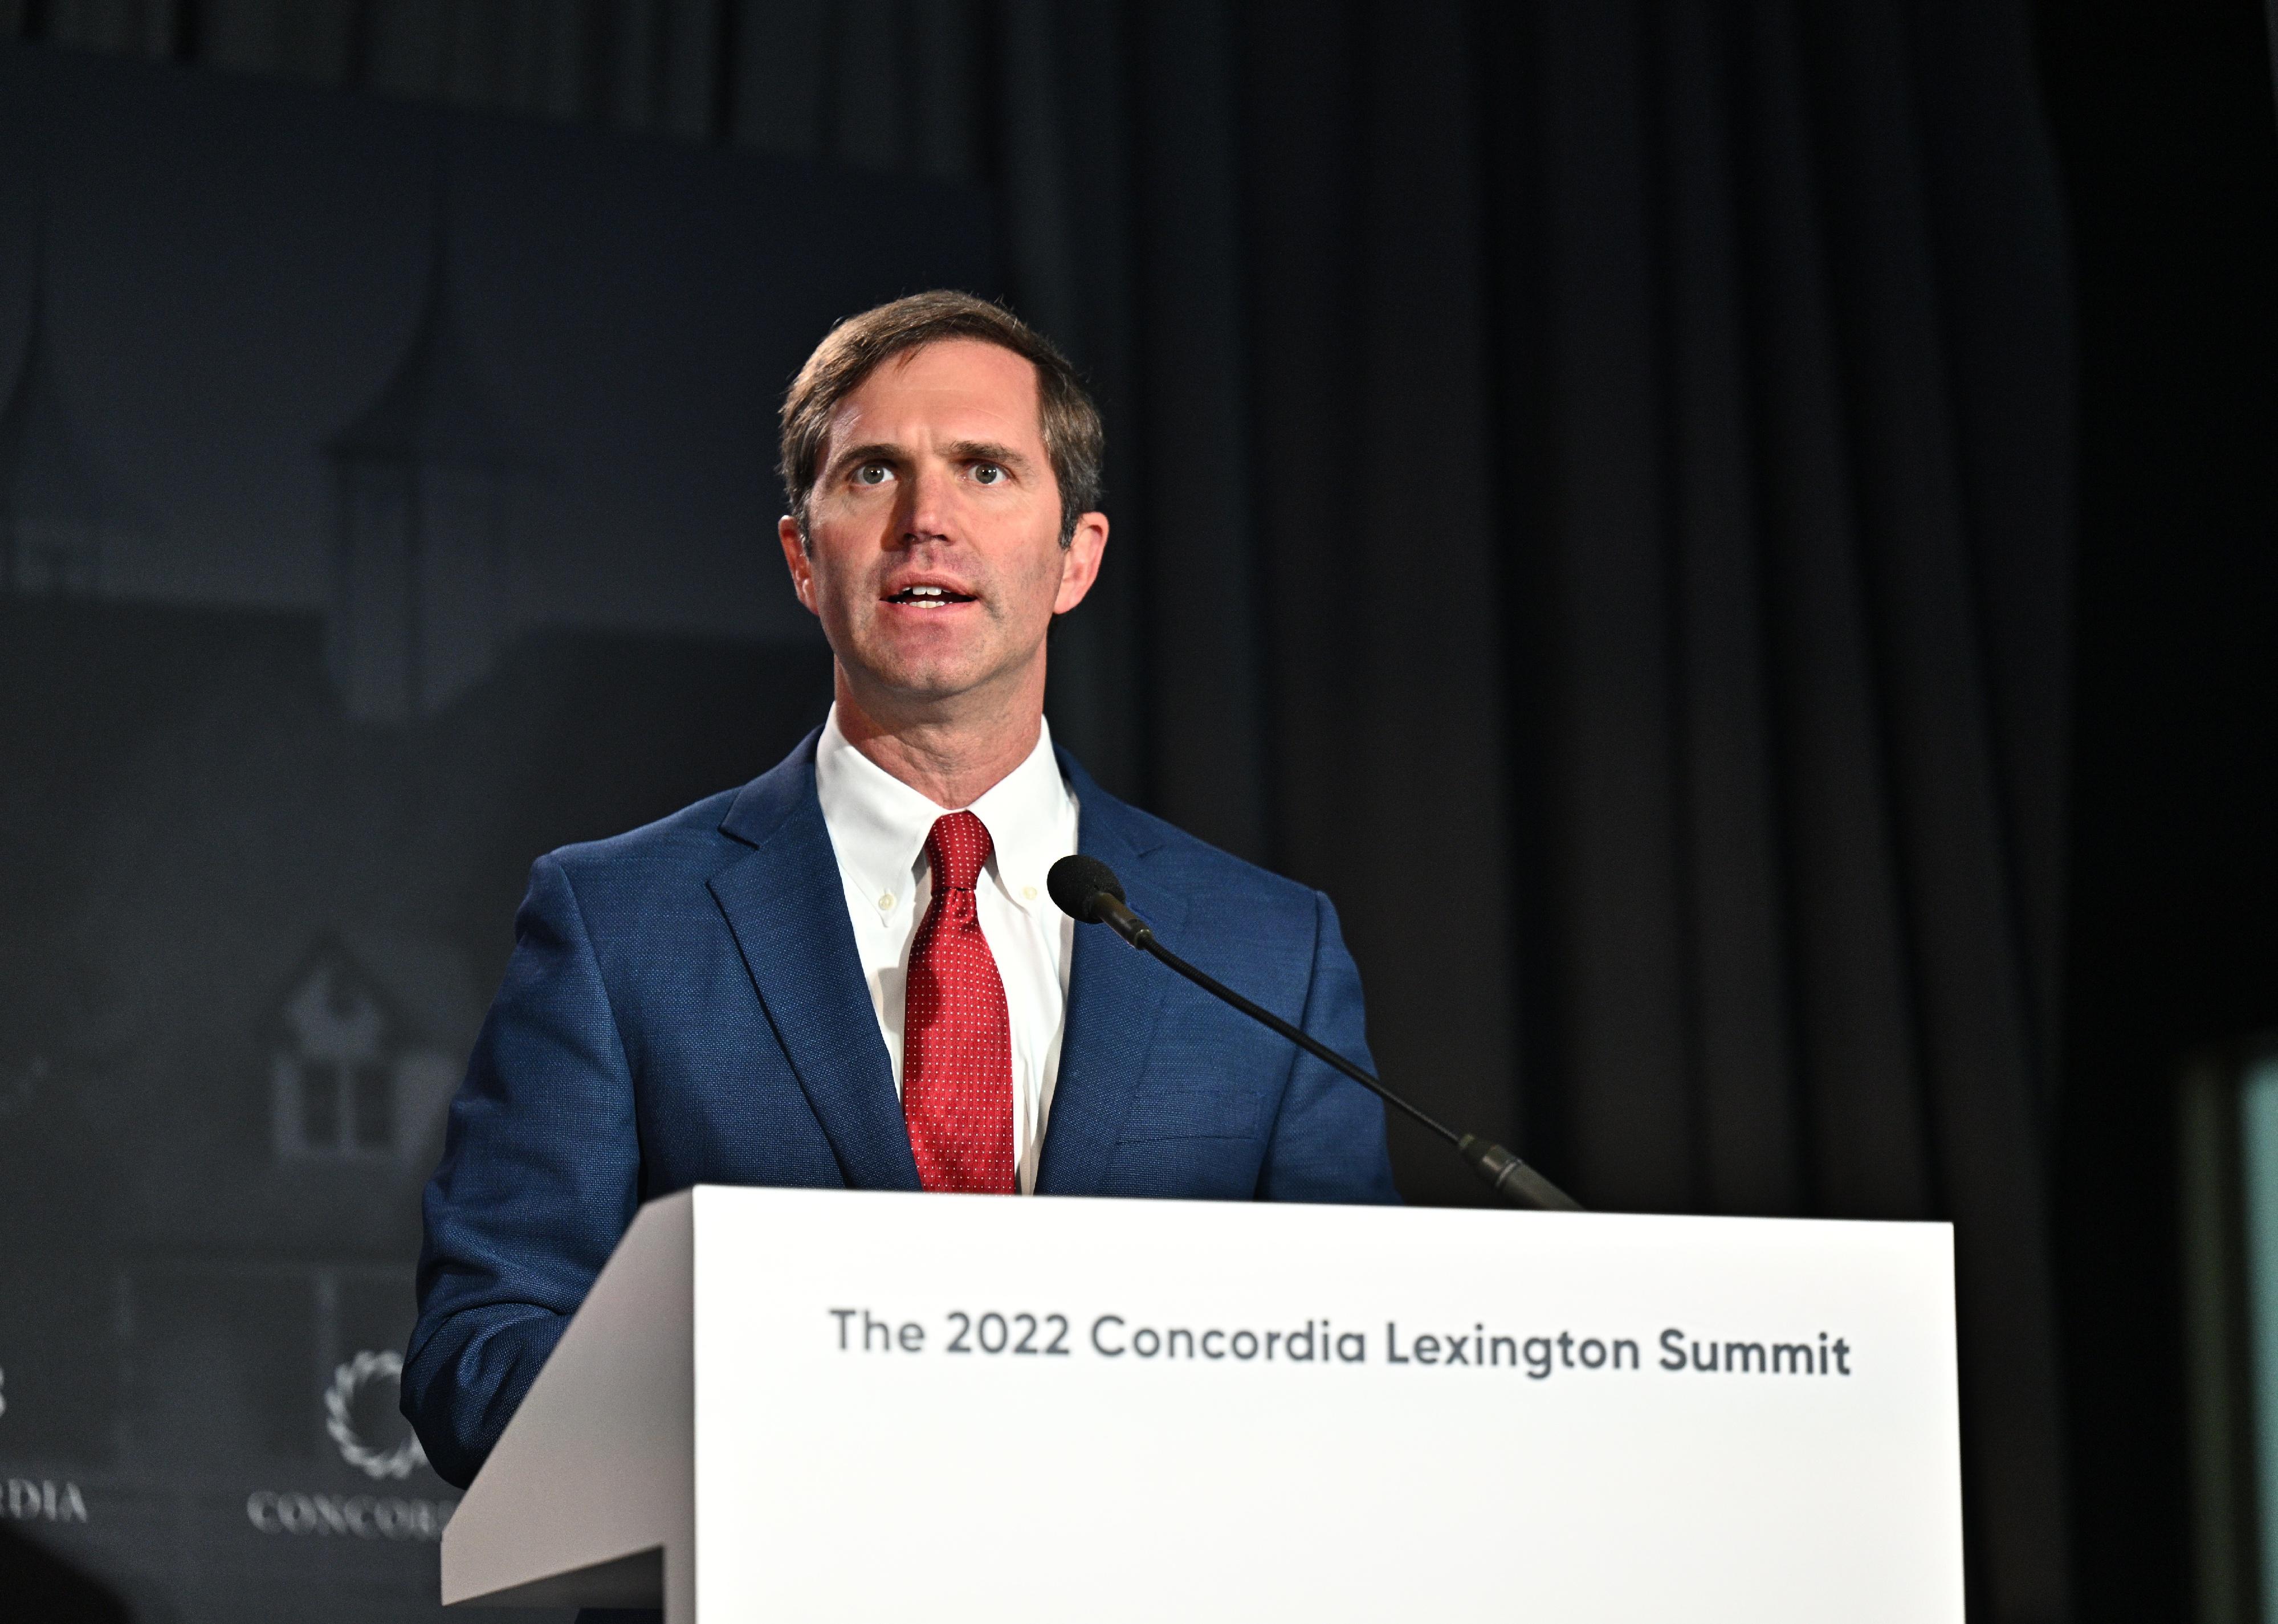 Andy Beshear speaks onstage at a summit in Lexington